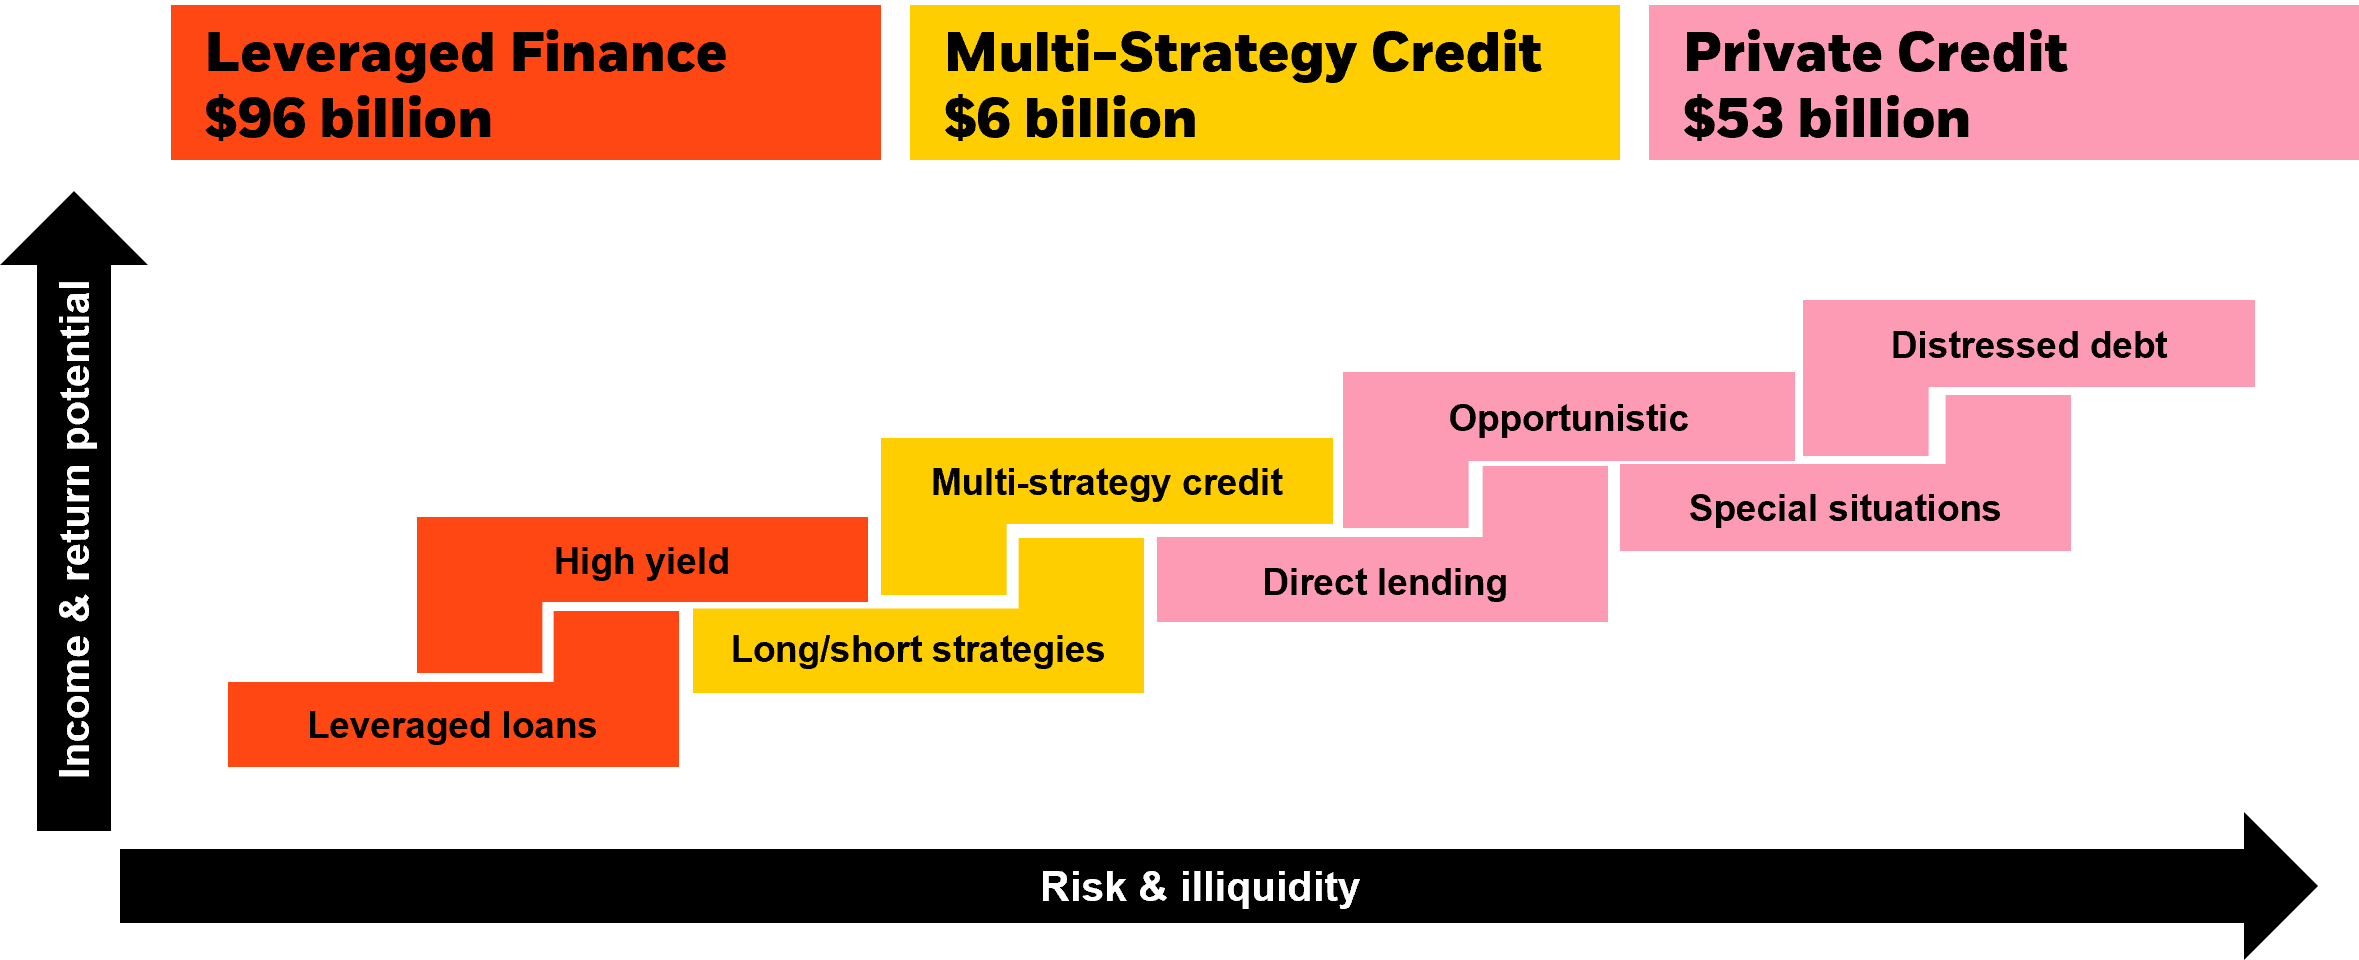 A full suite of credit solutions: leveraged finance, multi-strategy and private credit